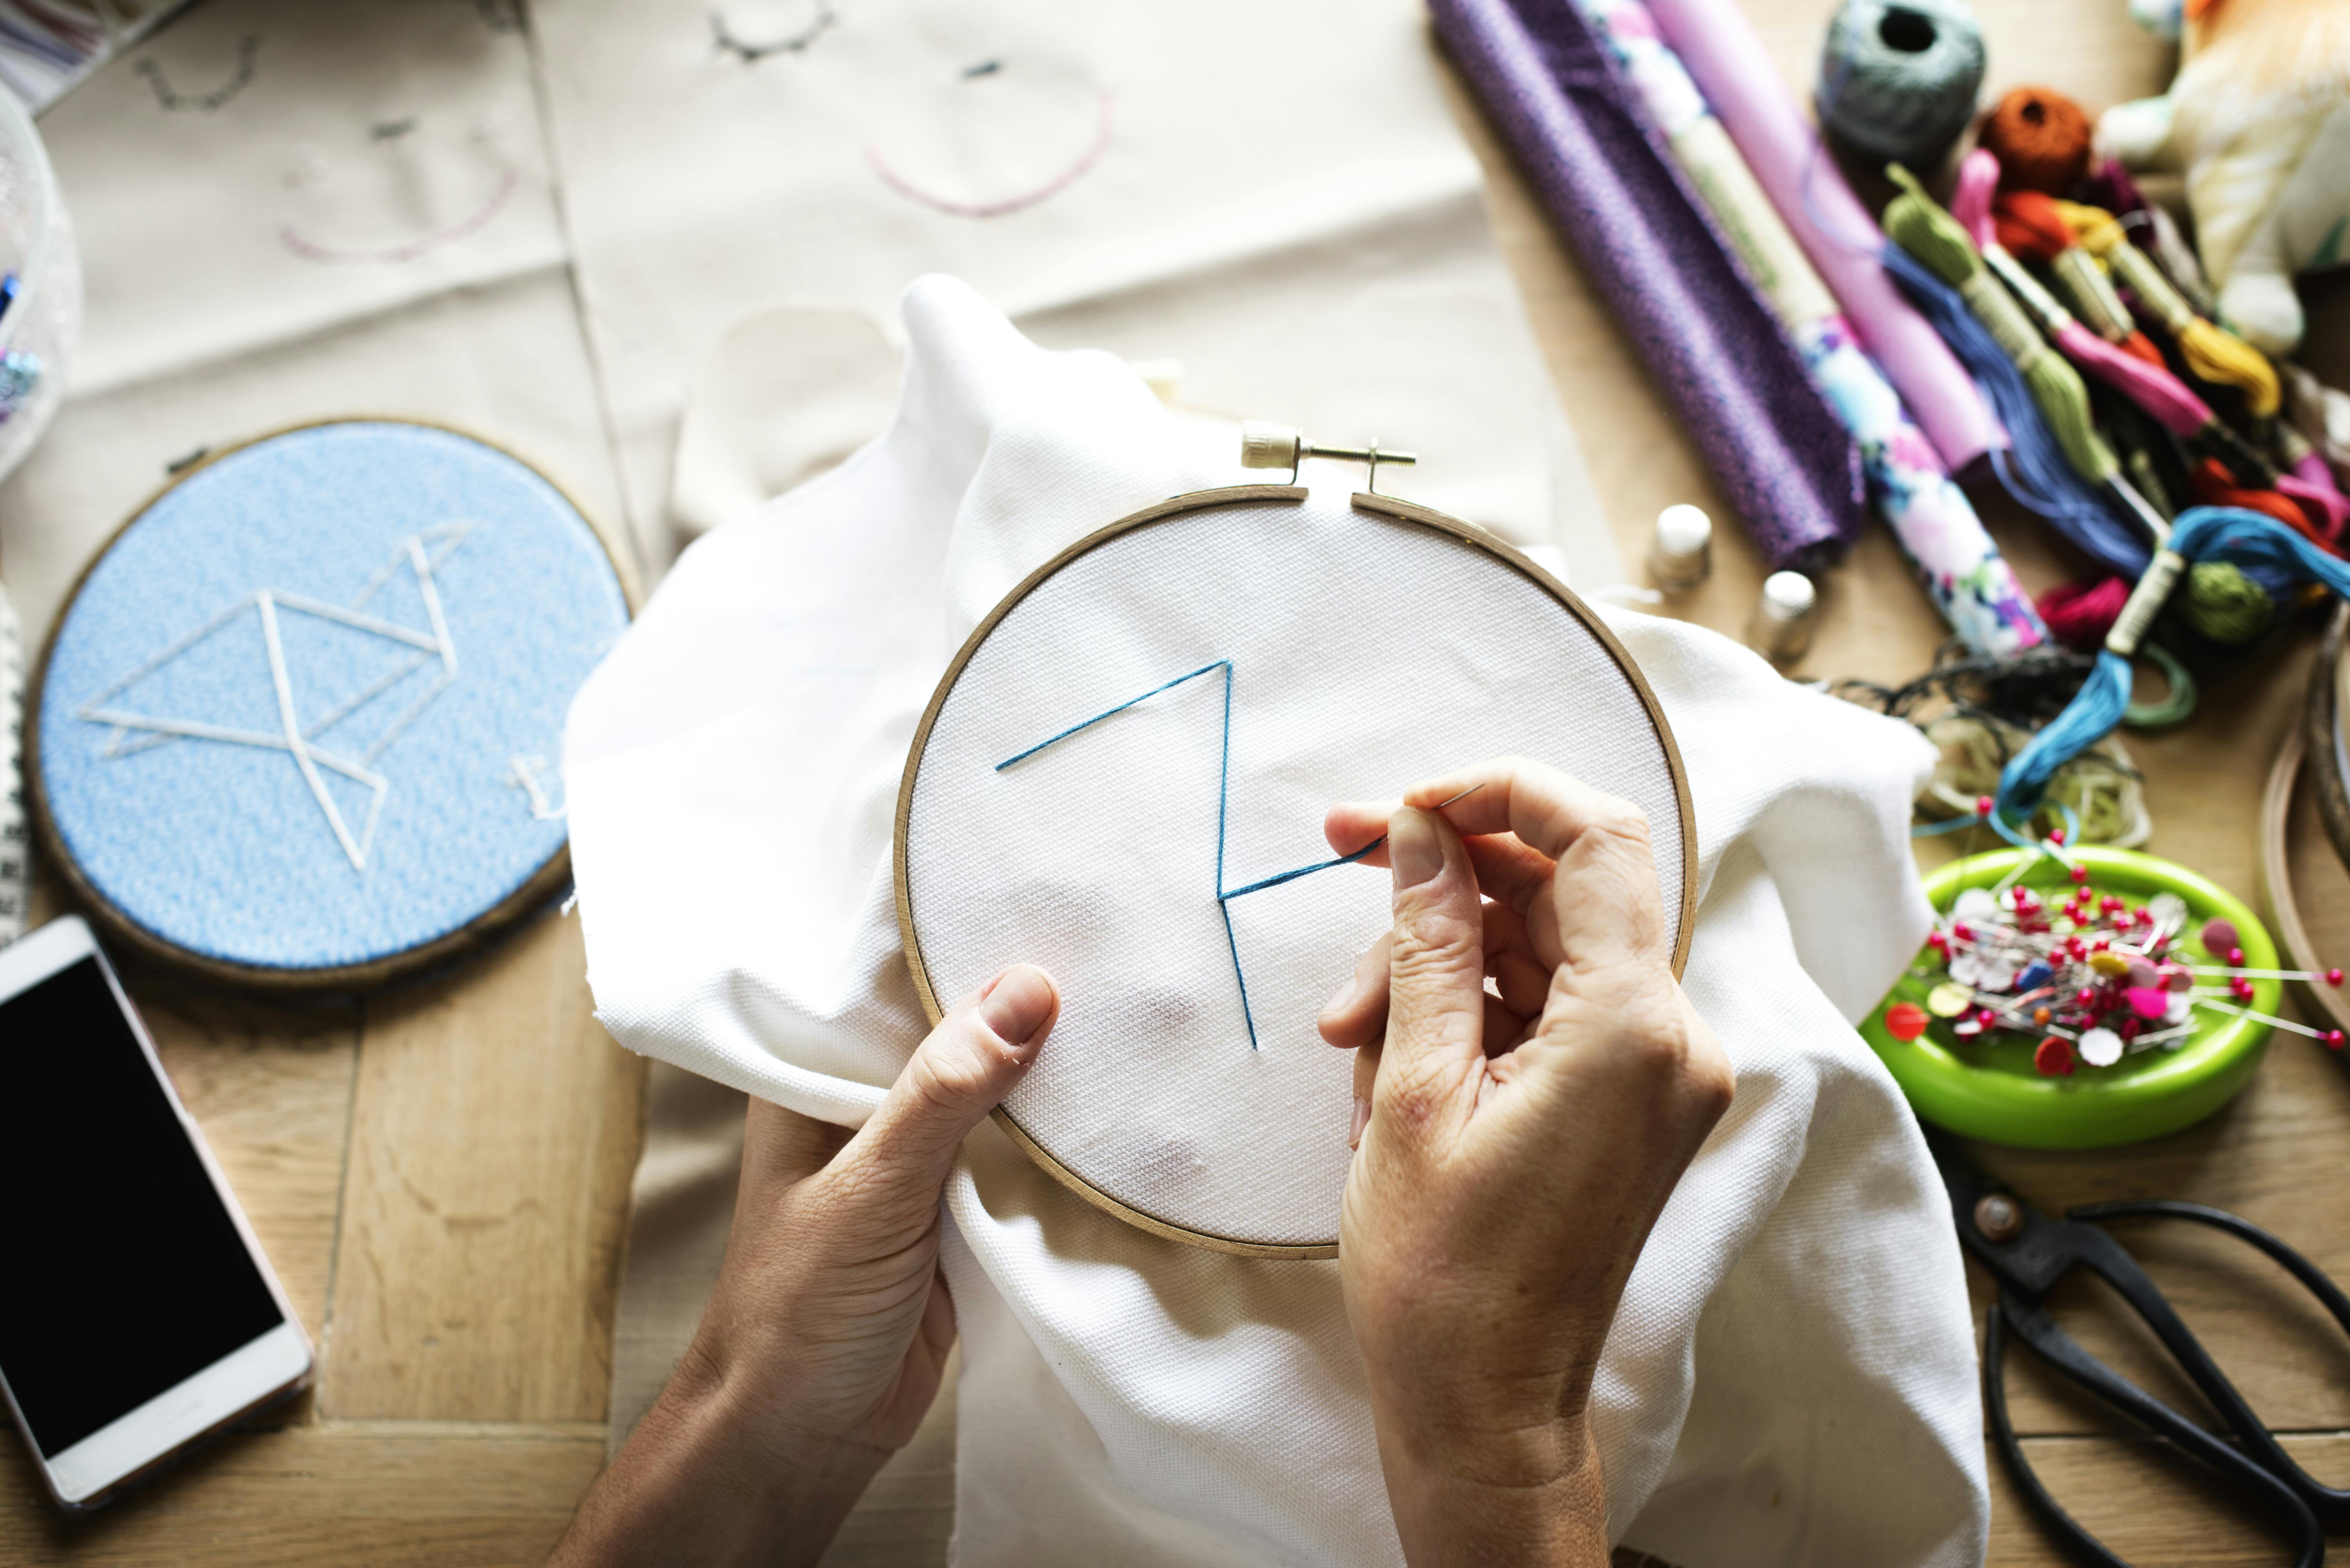  hands embroidering pattern using embroidery hoop with supplies in background